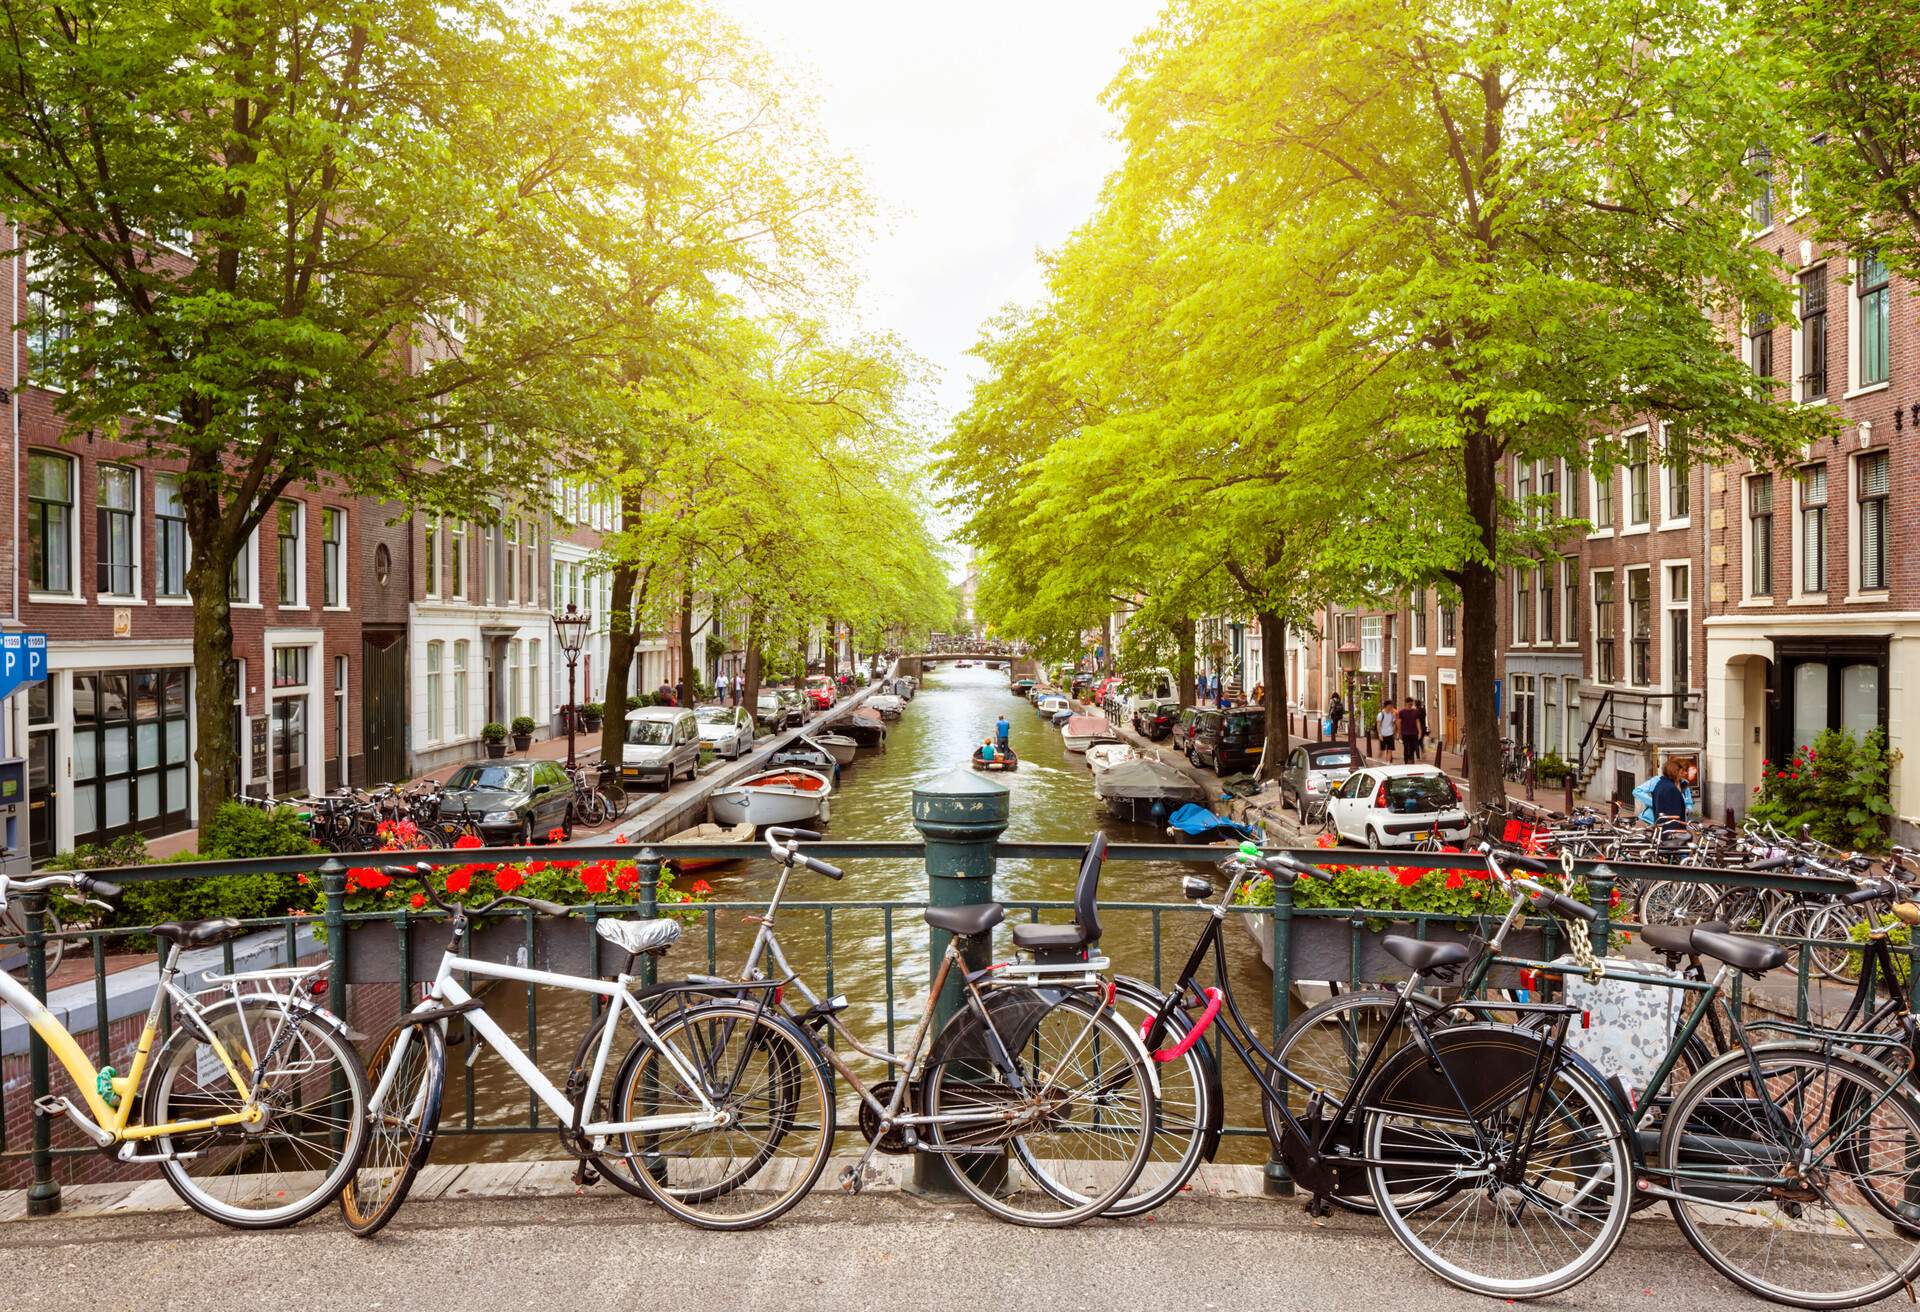 DEST_NETHERLANDS_AMSTERDAM_CANAL_BICYCLES_GettyImages